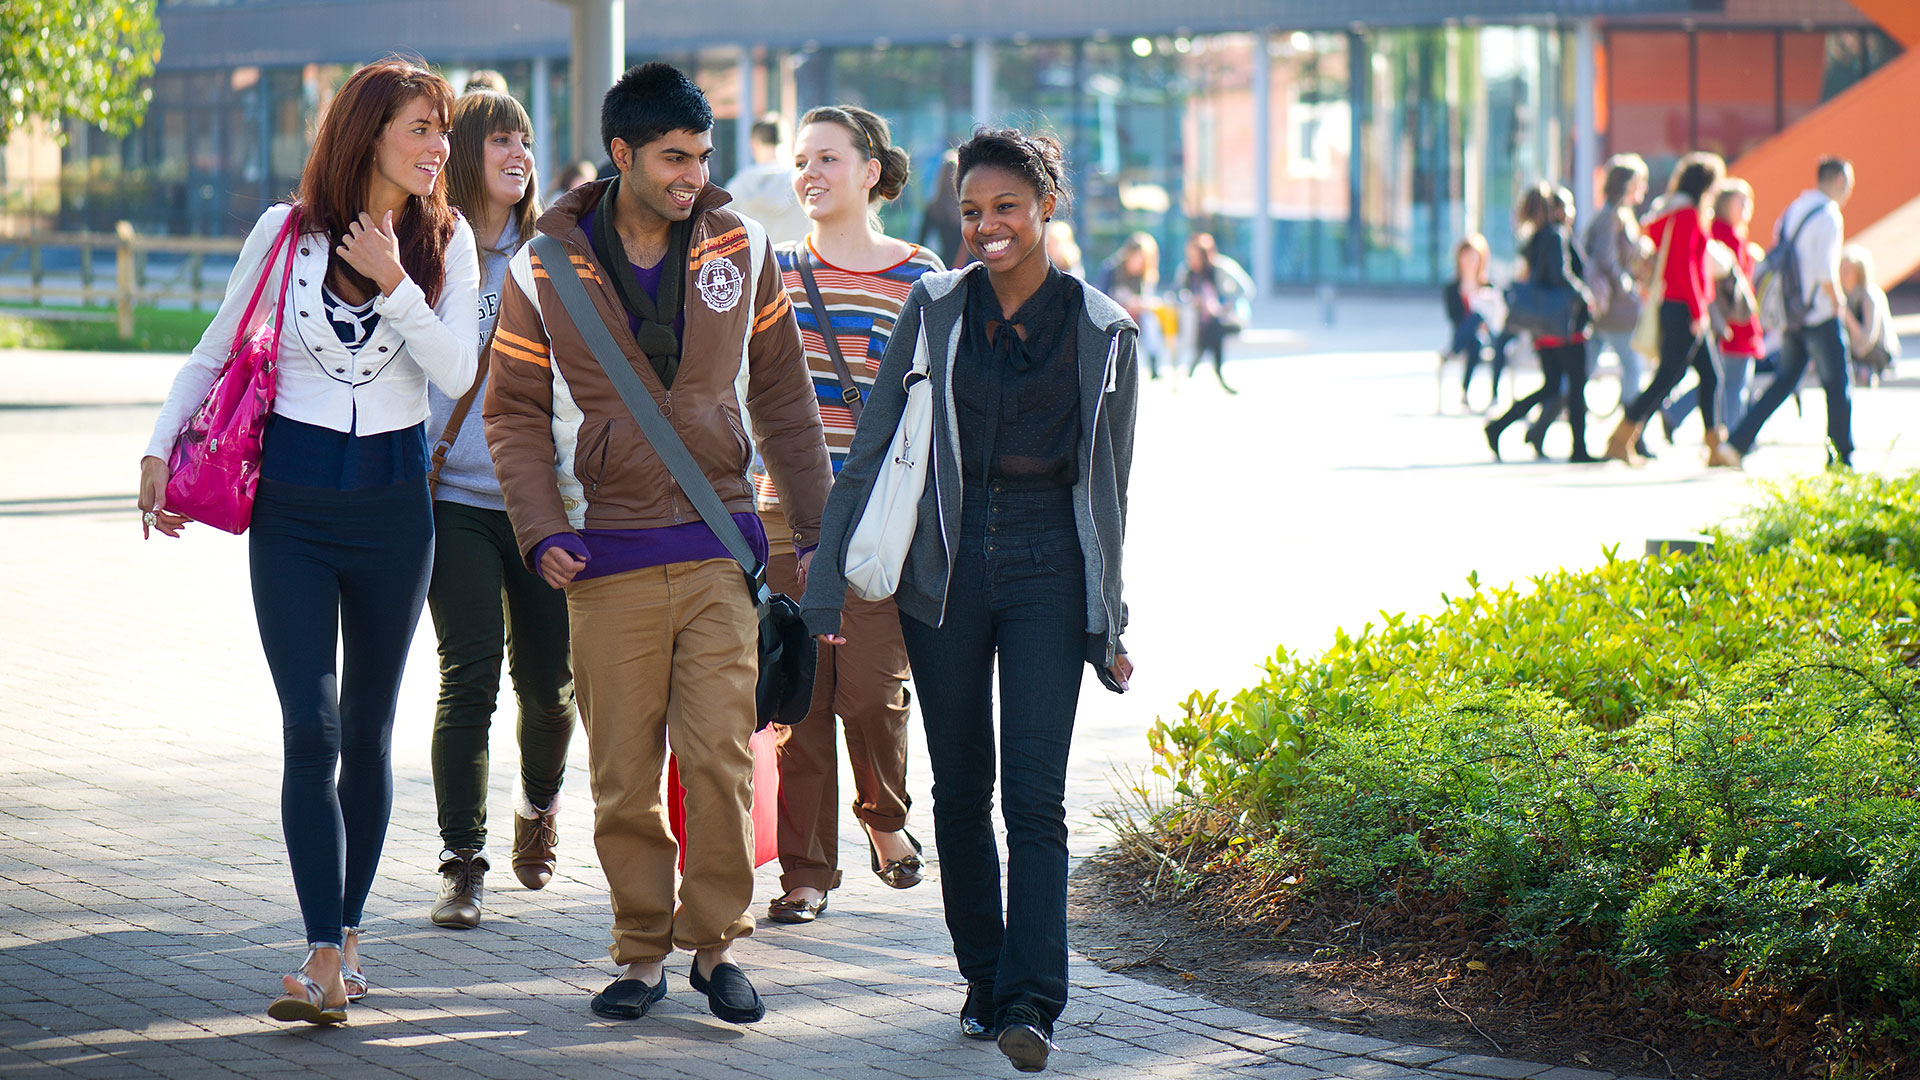 Students walking through campus, smiling and talking to each other